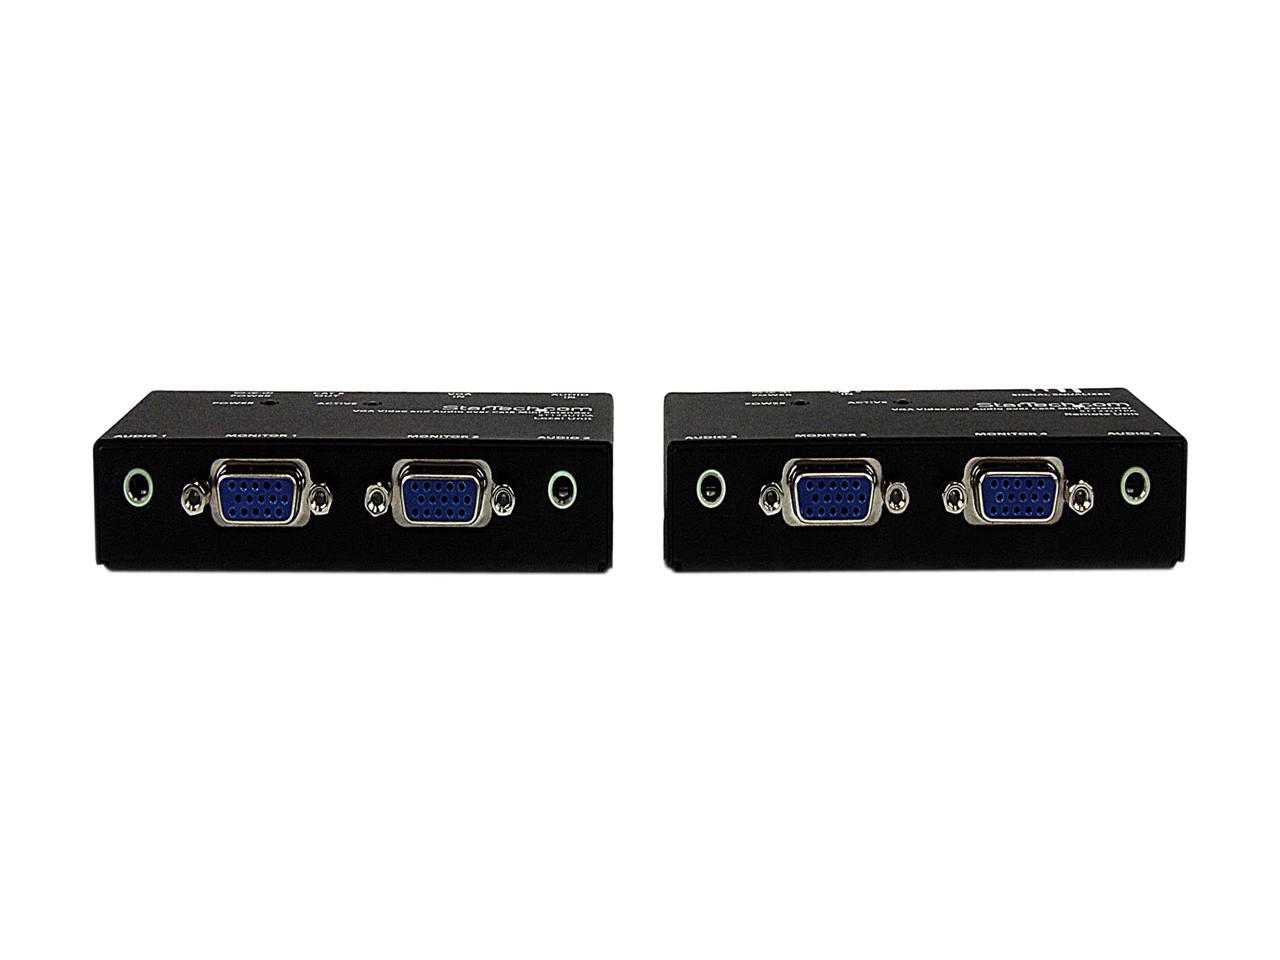 StarTech.com ST122UTPA VGA Video Extender over Cat 5 with Audio - Up to 500ft (150m) - VGA over Cat5 Extender - 1 Local and 1 Remote